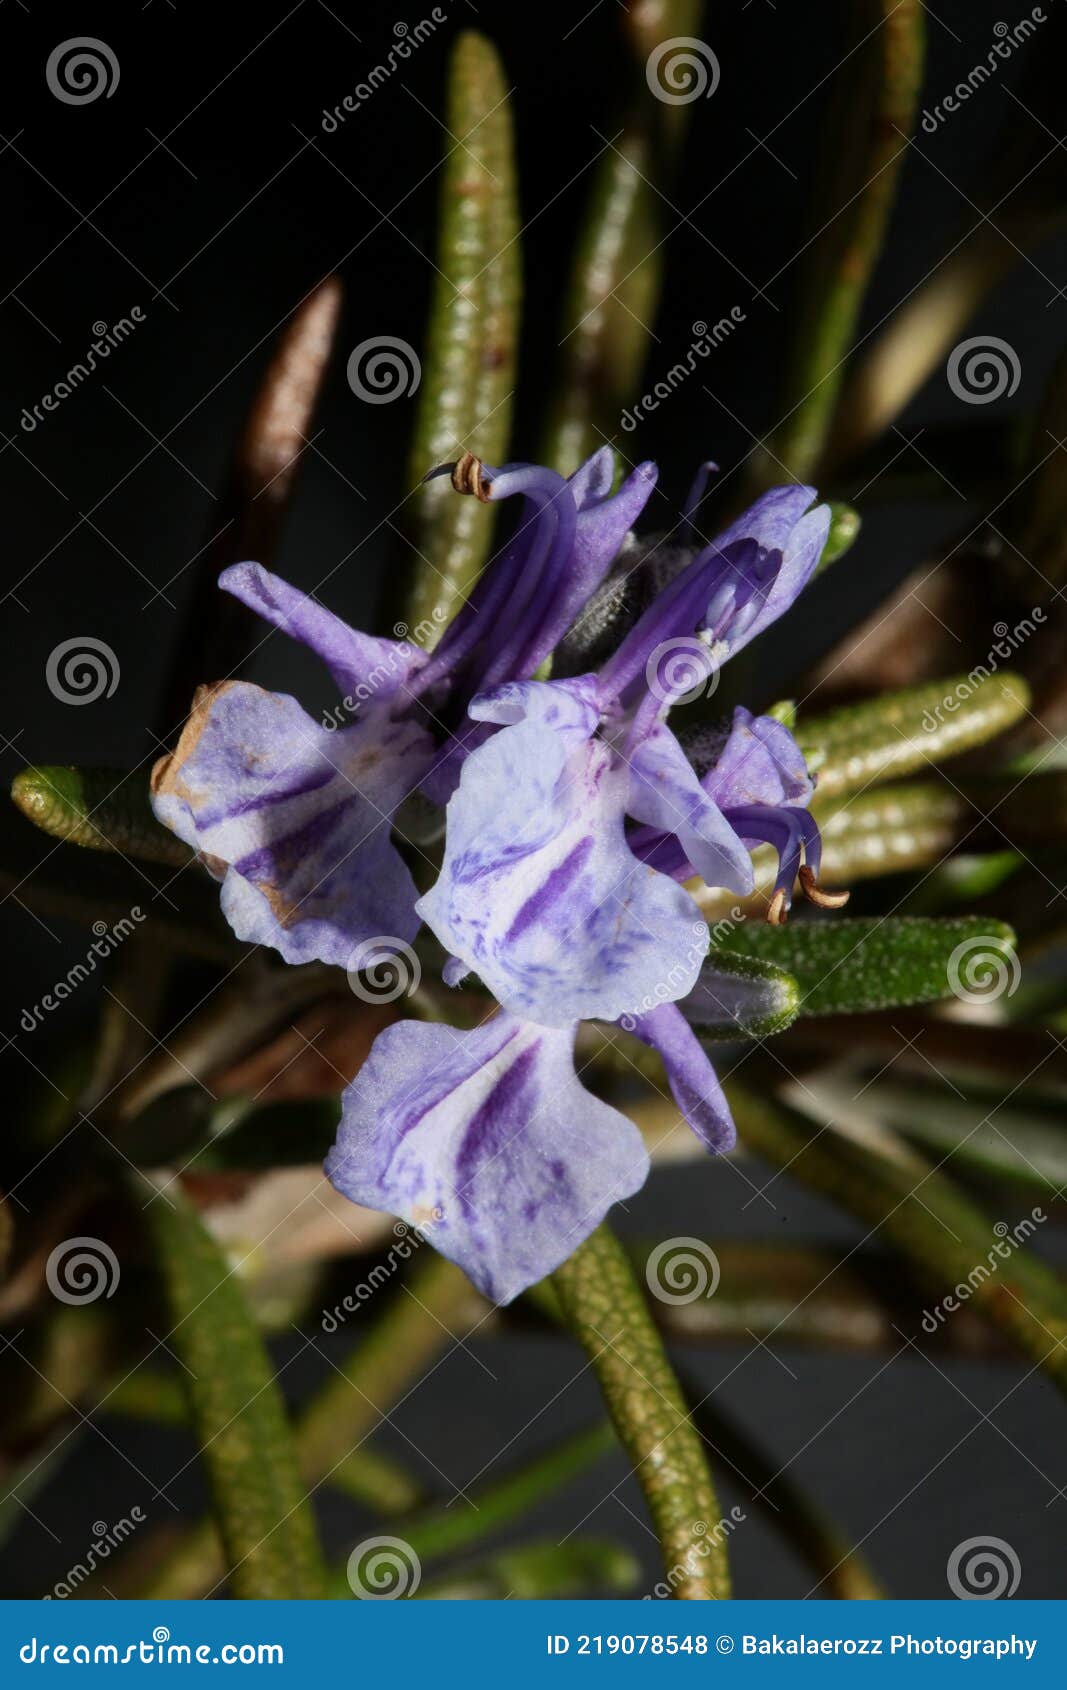 rosmarinus officinalis flower close up family lamiaceae in black modern background high quality big size print